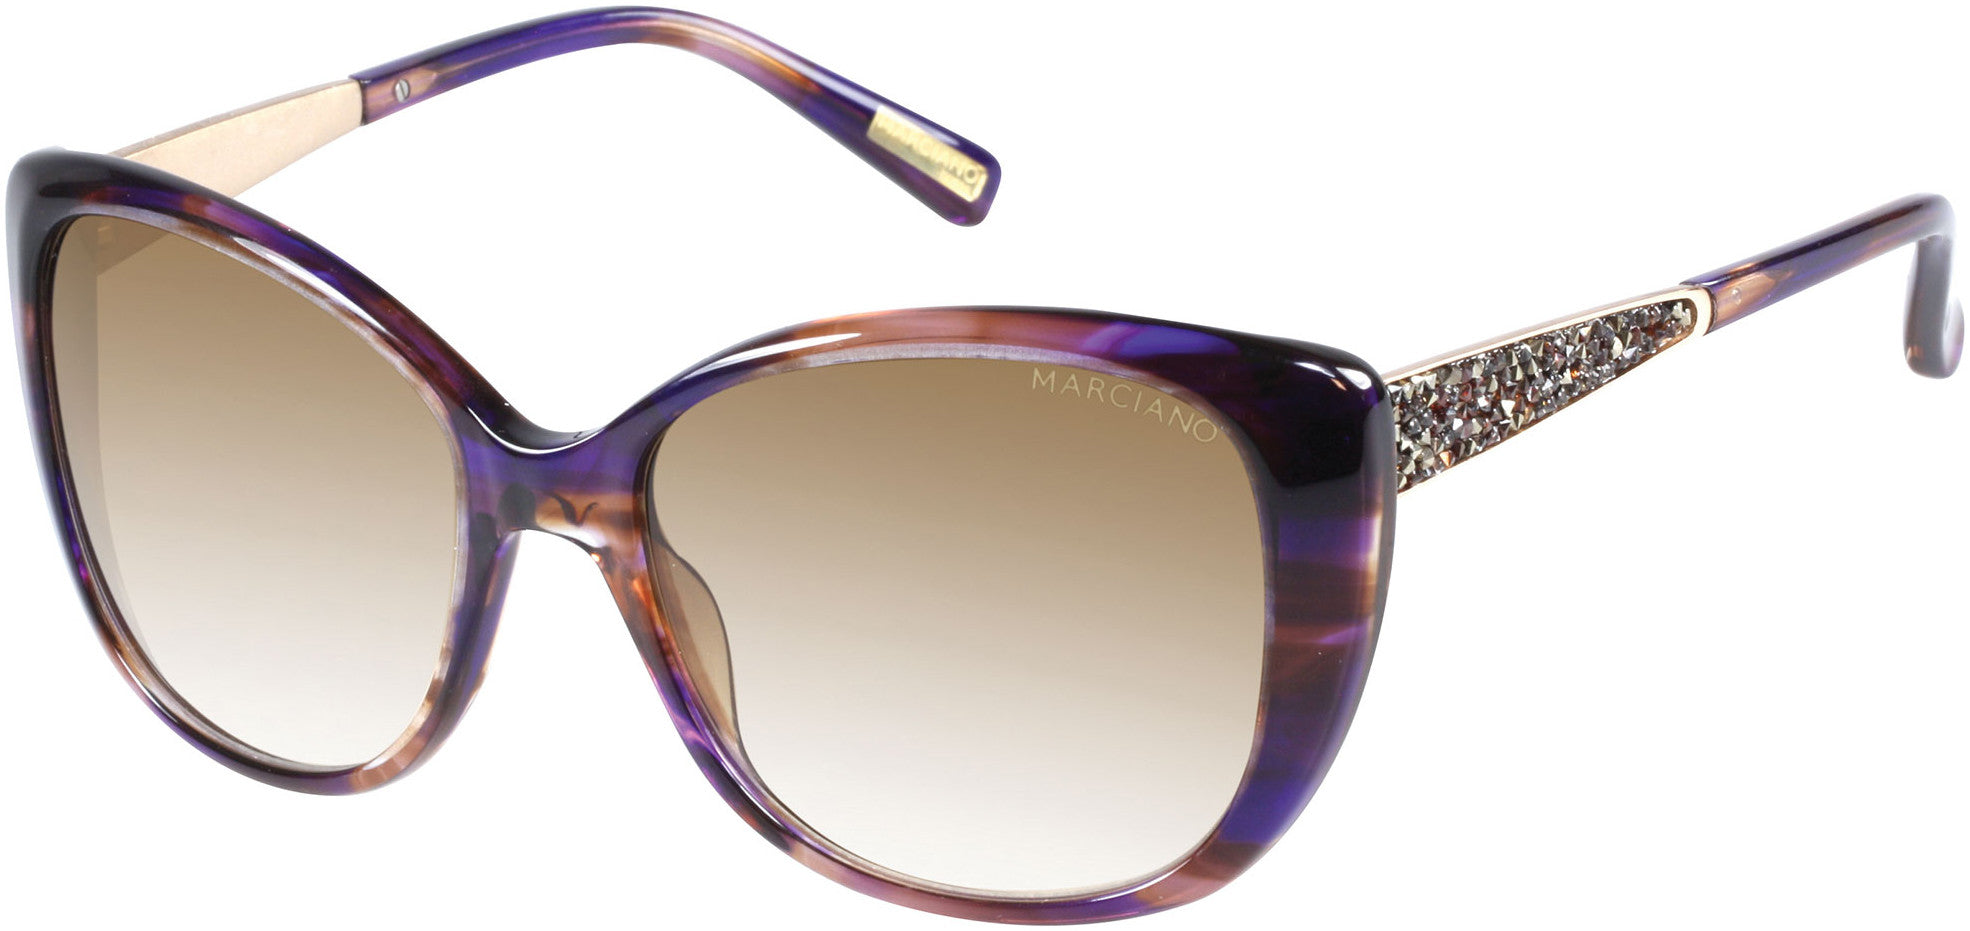 Guess By Marciano GM0722 Cat Sunglasses O44-O44 - Purple/brown Gradient Lens